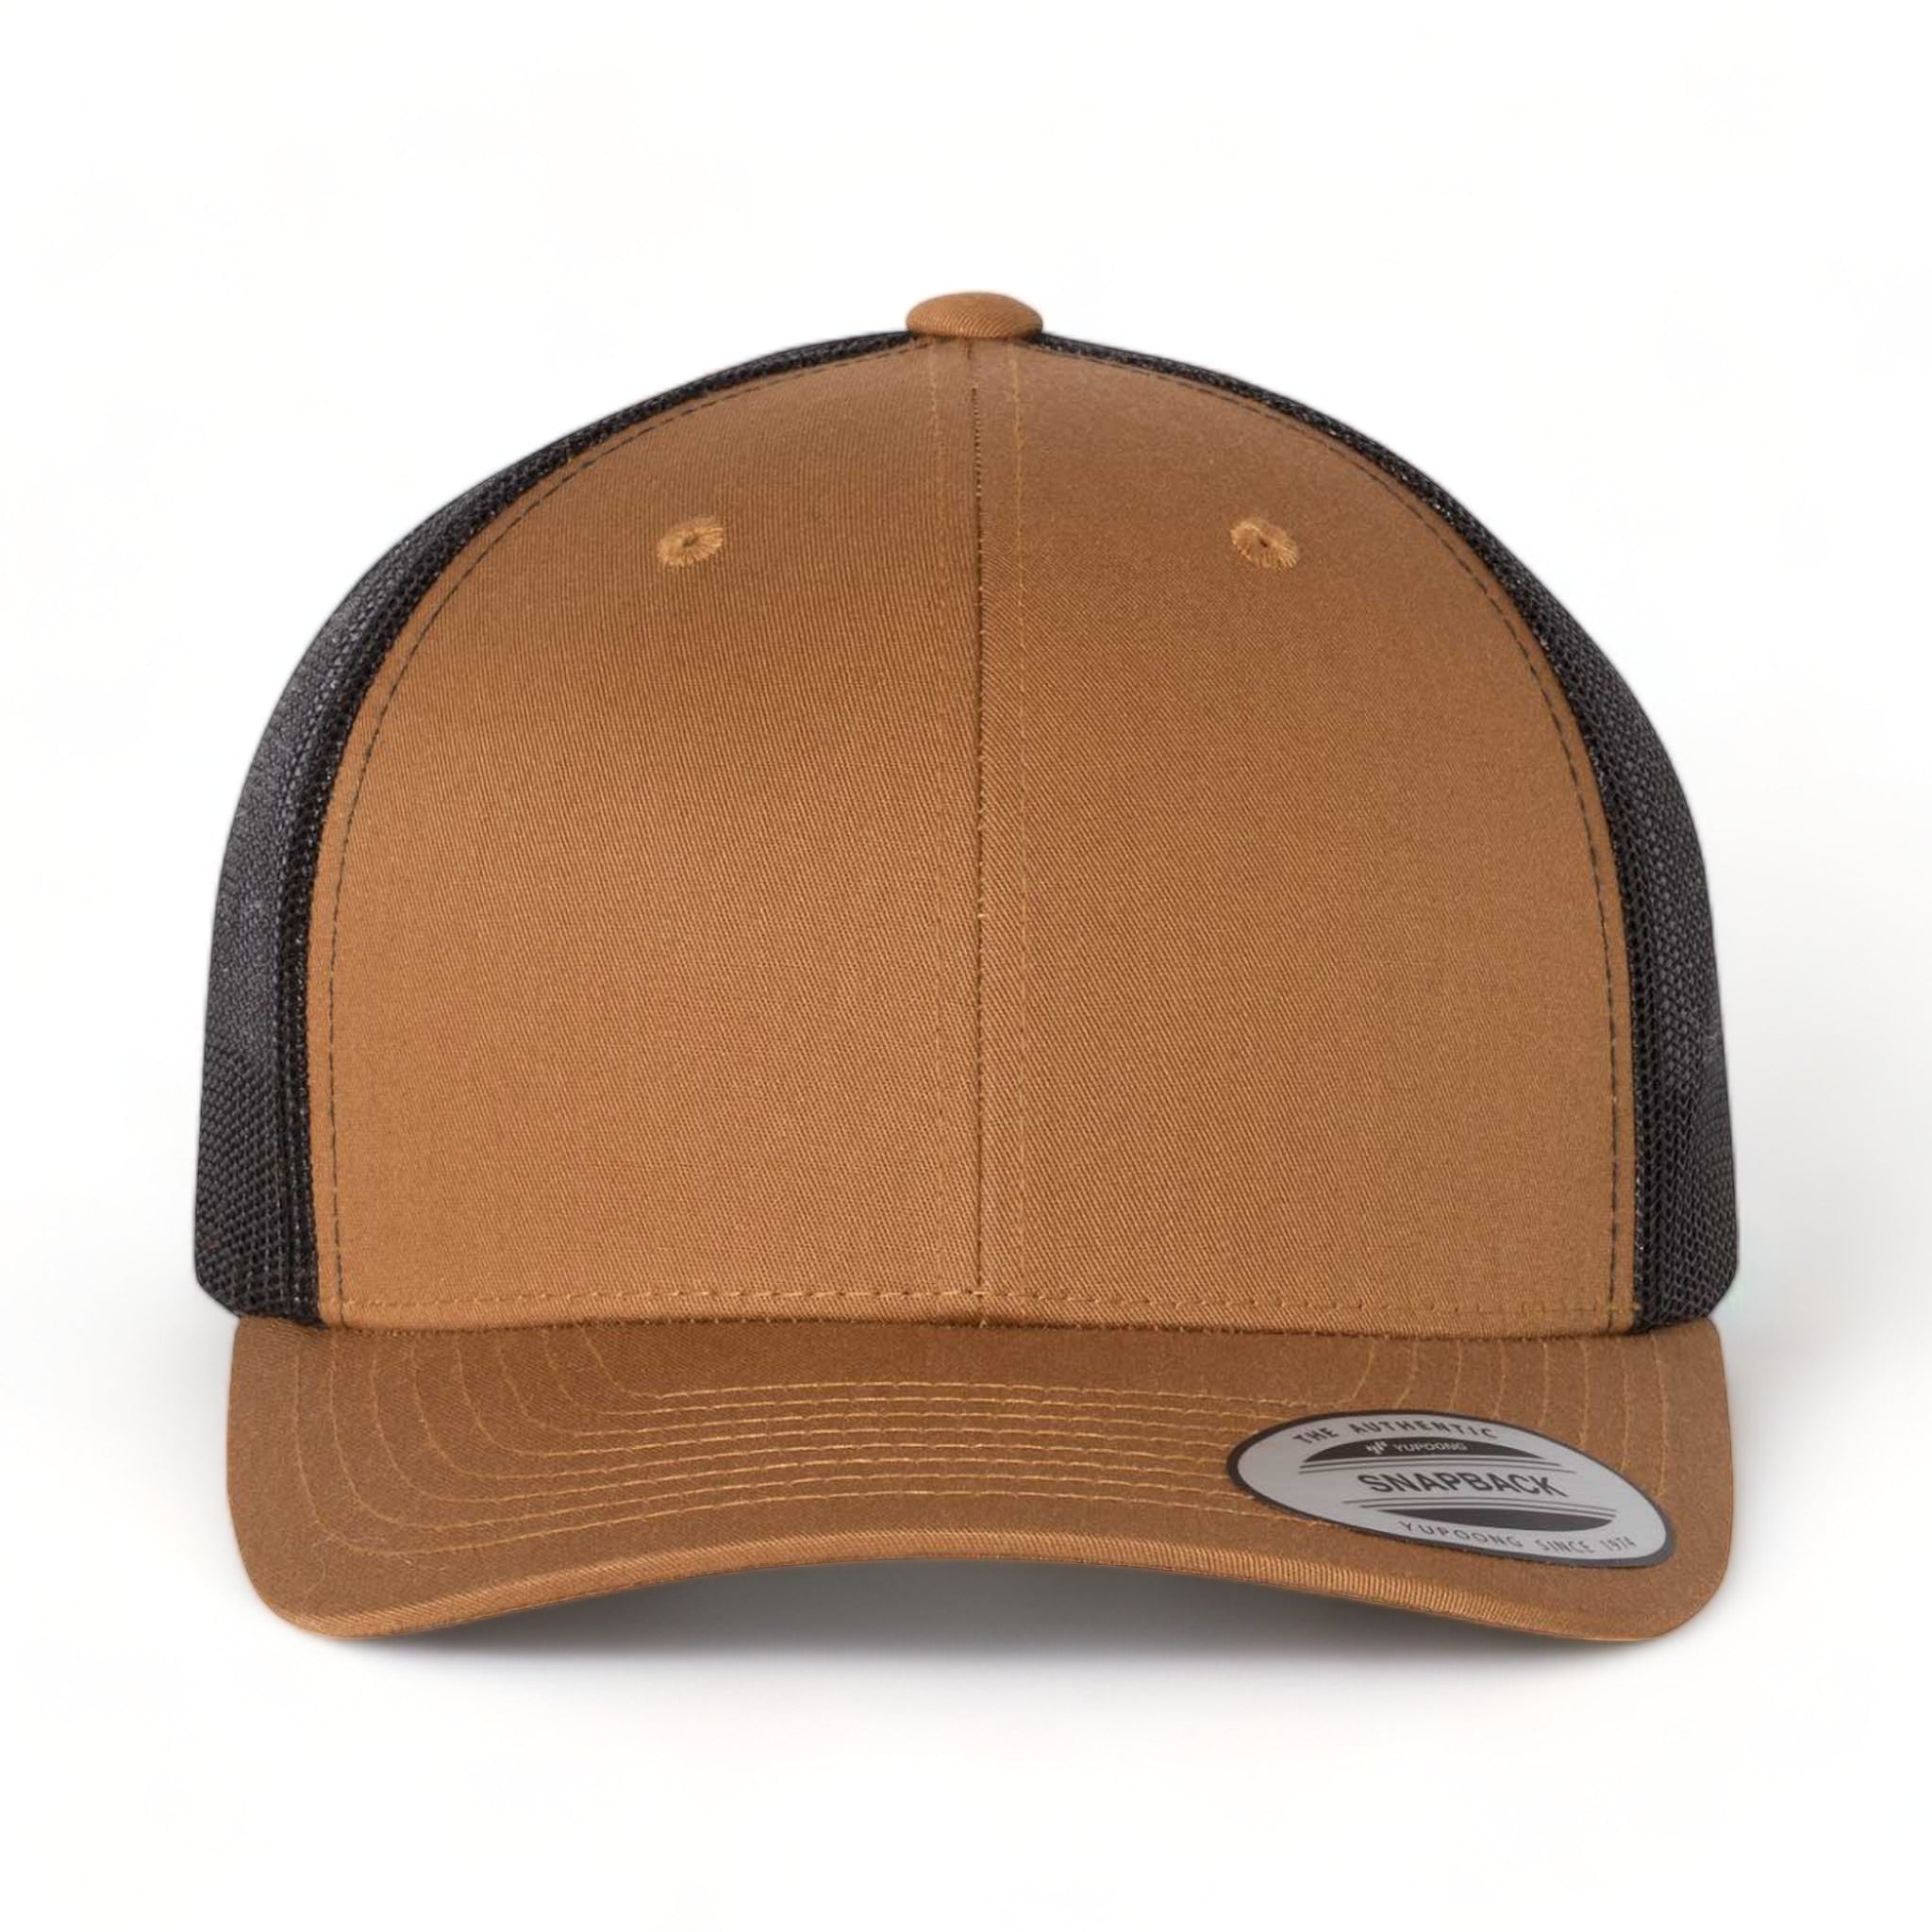 Front view of YP Classics 6606 custom hat in caramel and black